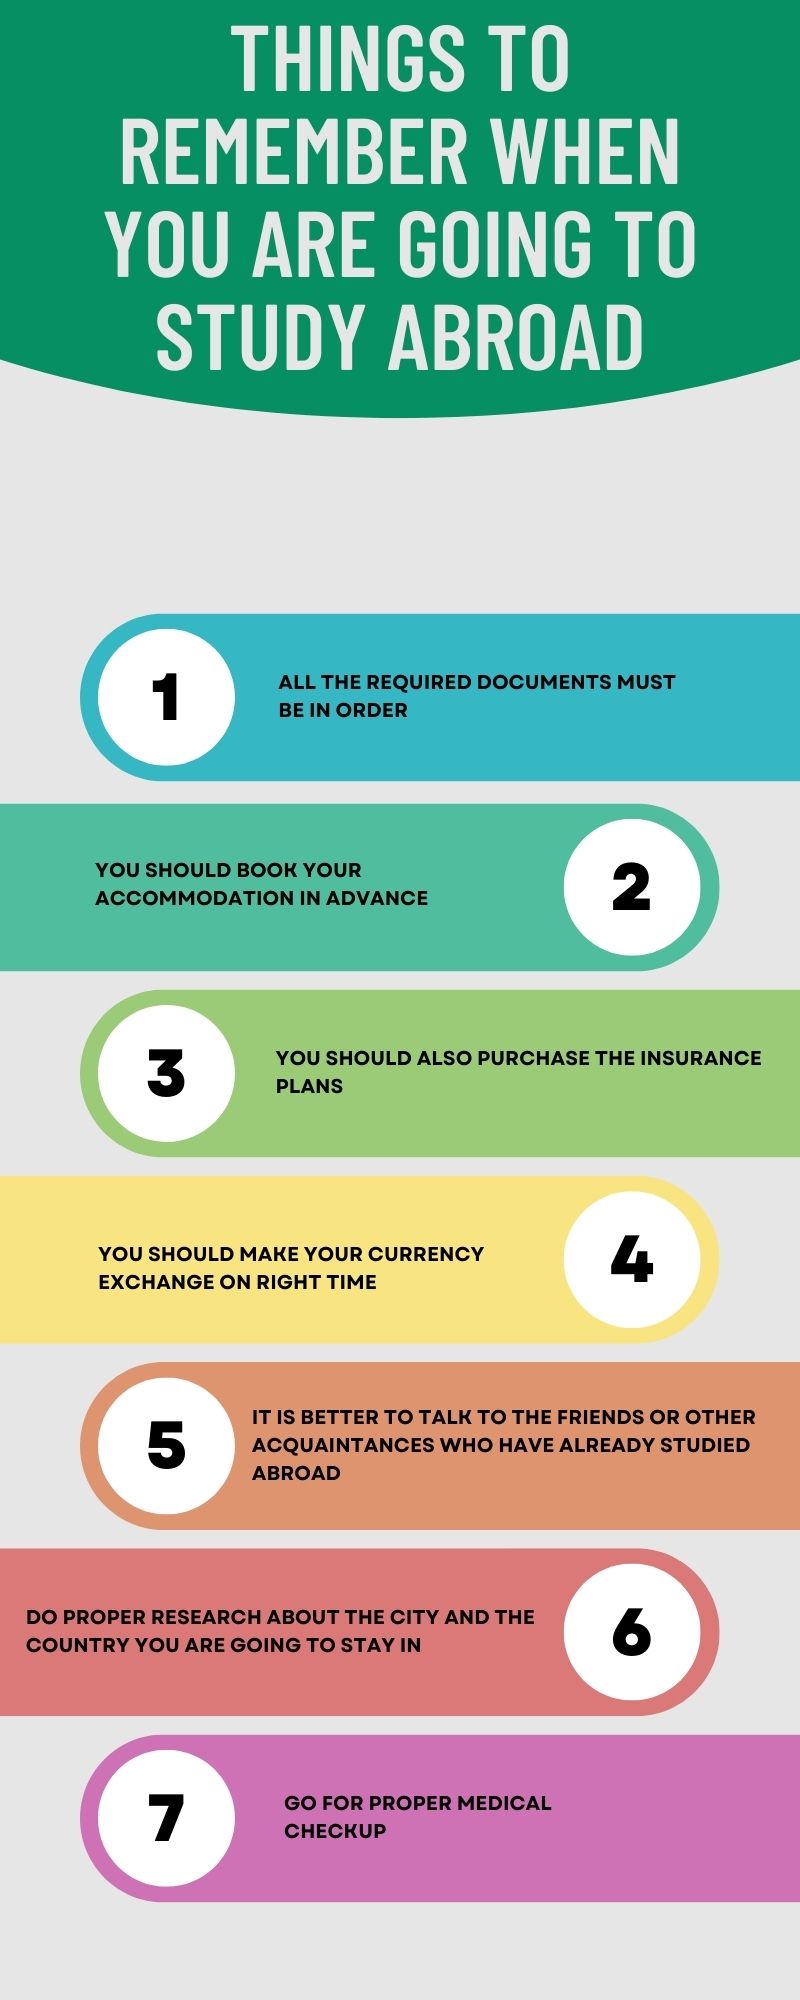 Things to Remember When You Are Going to Study Abroad